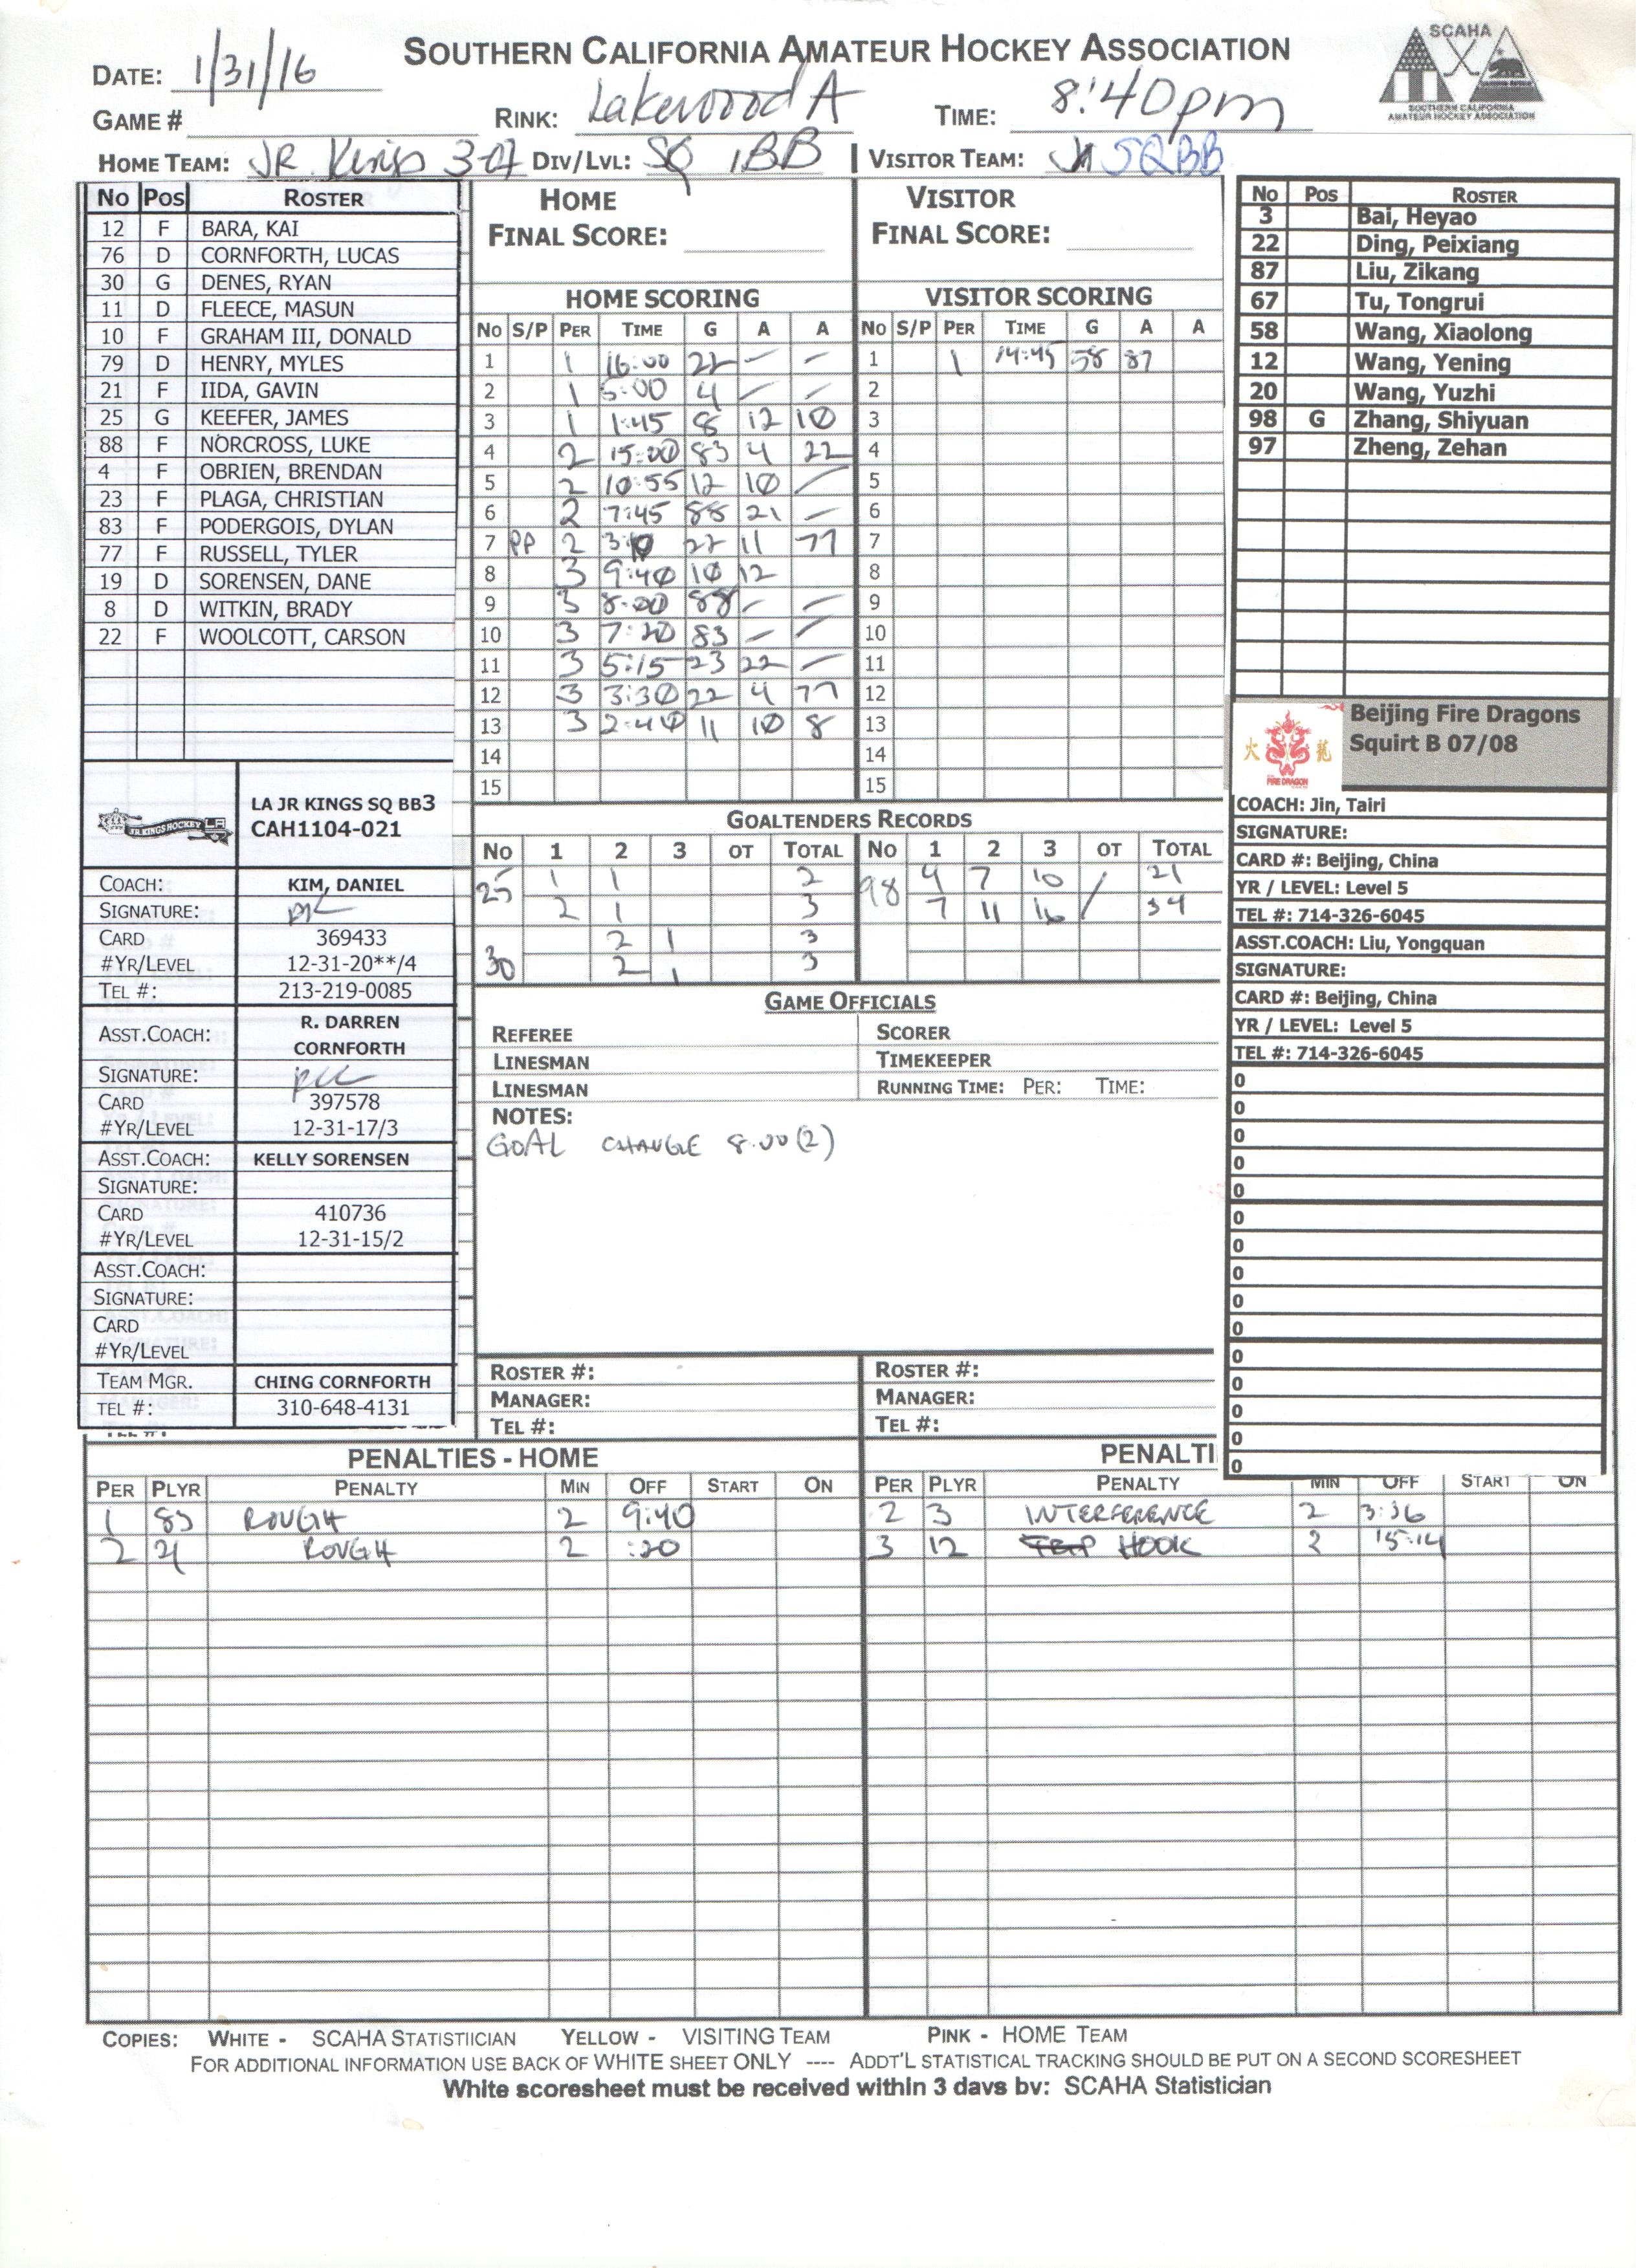 Dayton Icehounds Hockey  How to fill out a game Score Sheet